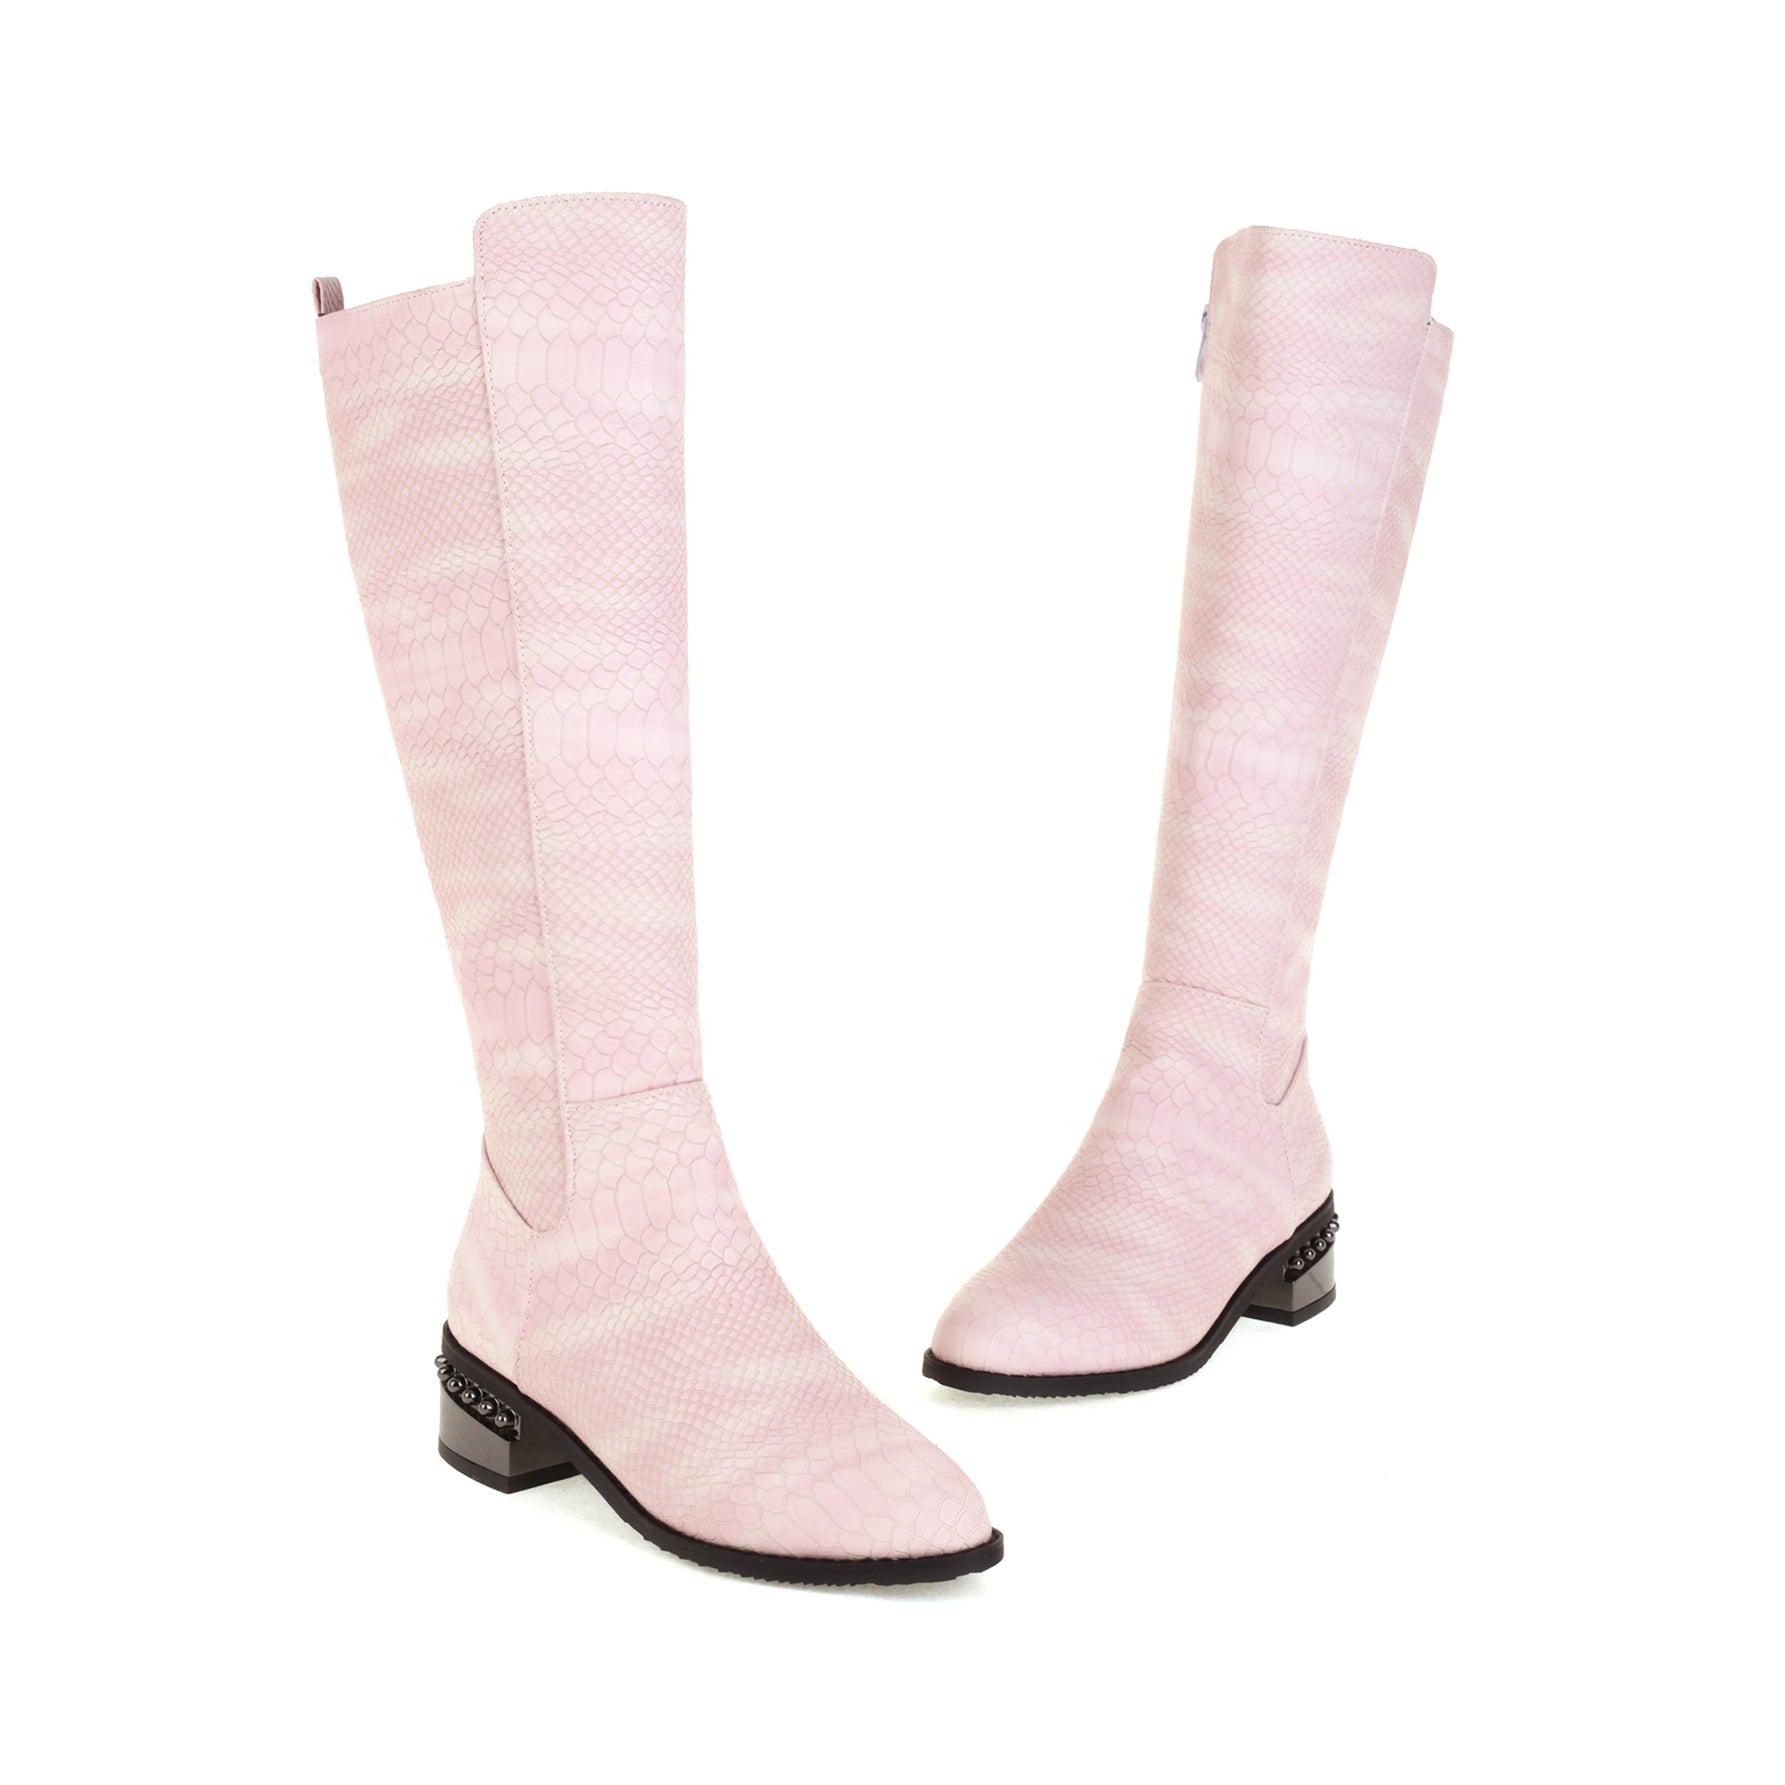 Bigsizeheels Simple solid color round toe over-the-knee boots-Pink freeshipping - bigsizeheel®-size5-size15 -All Plus Sizes Available!